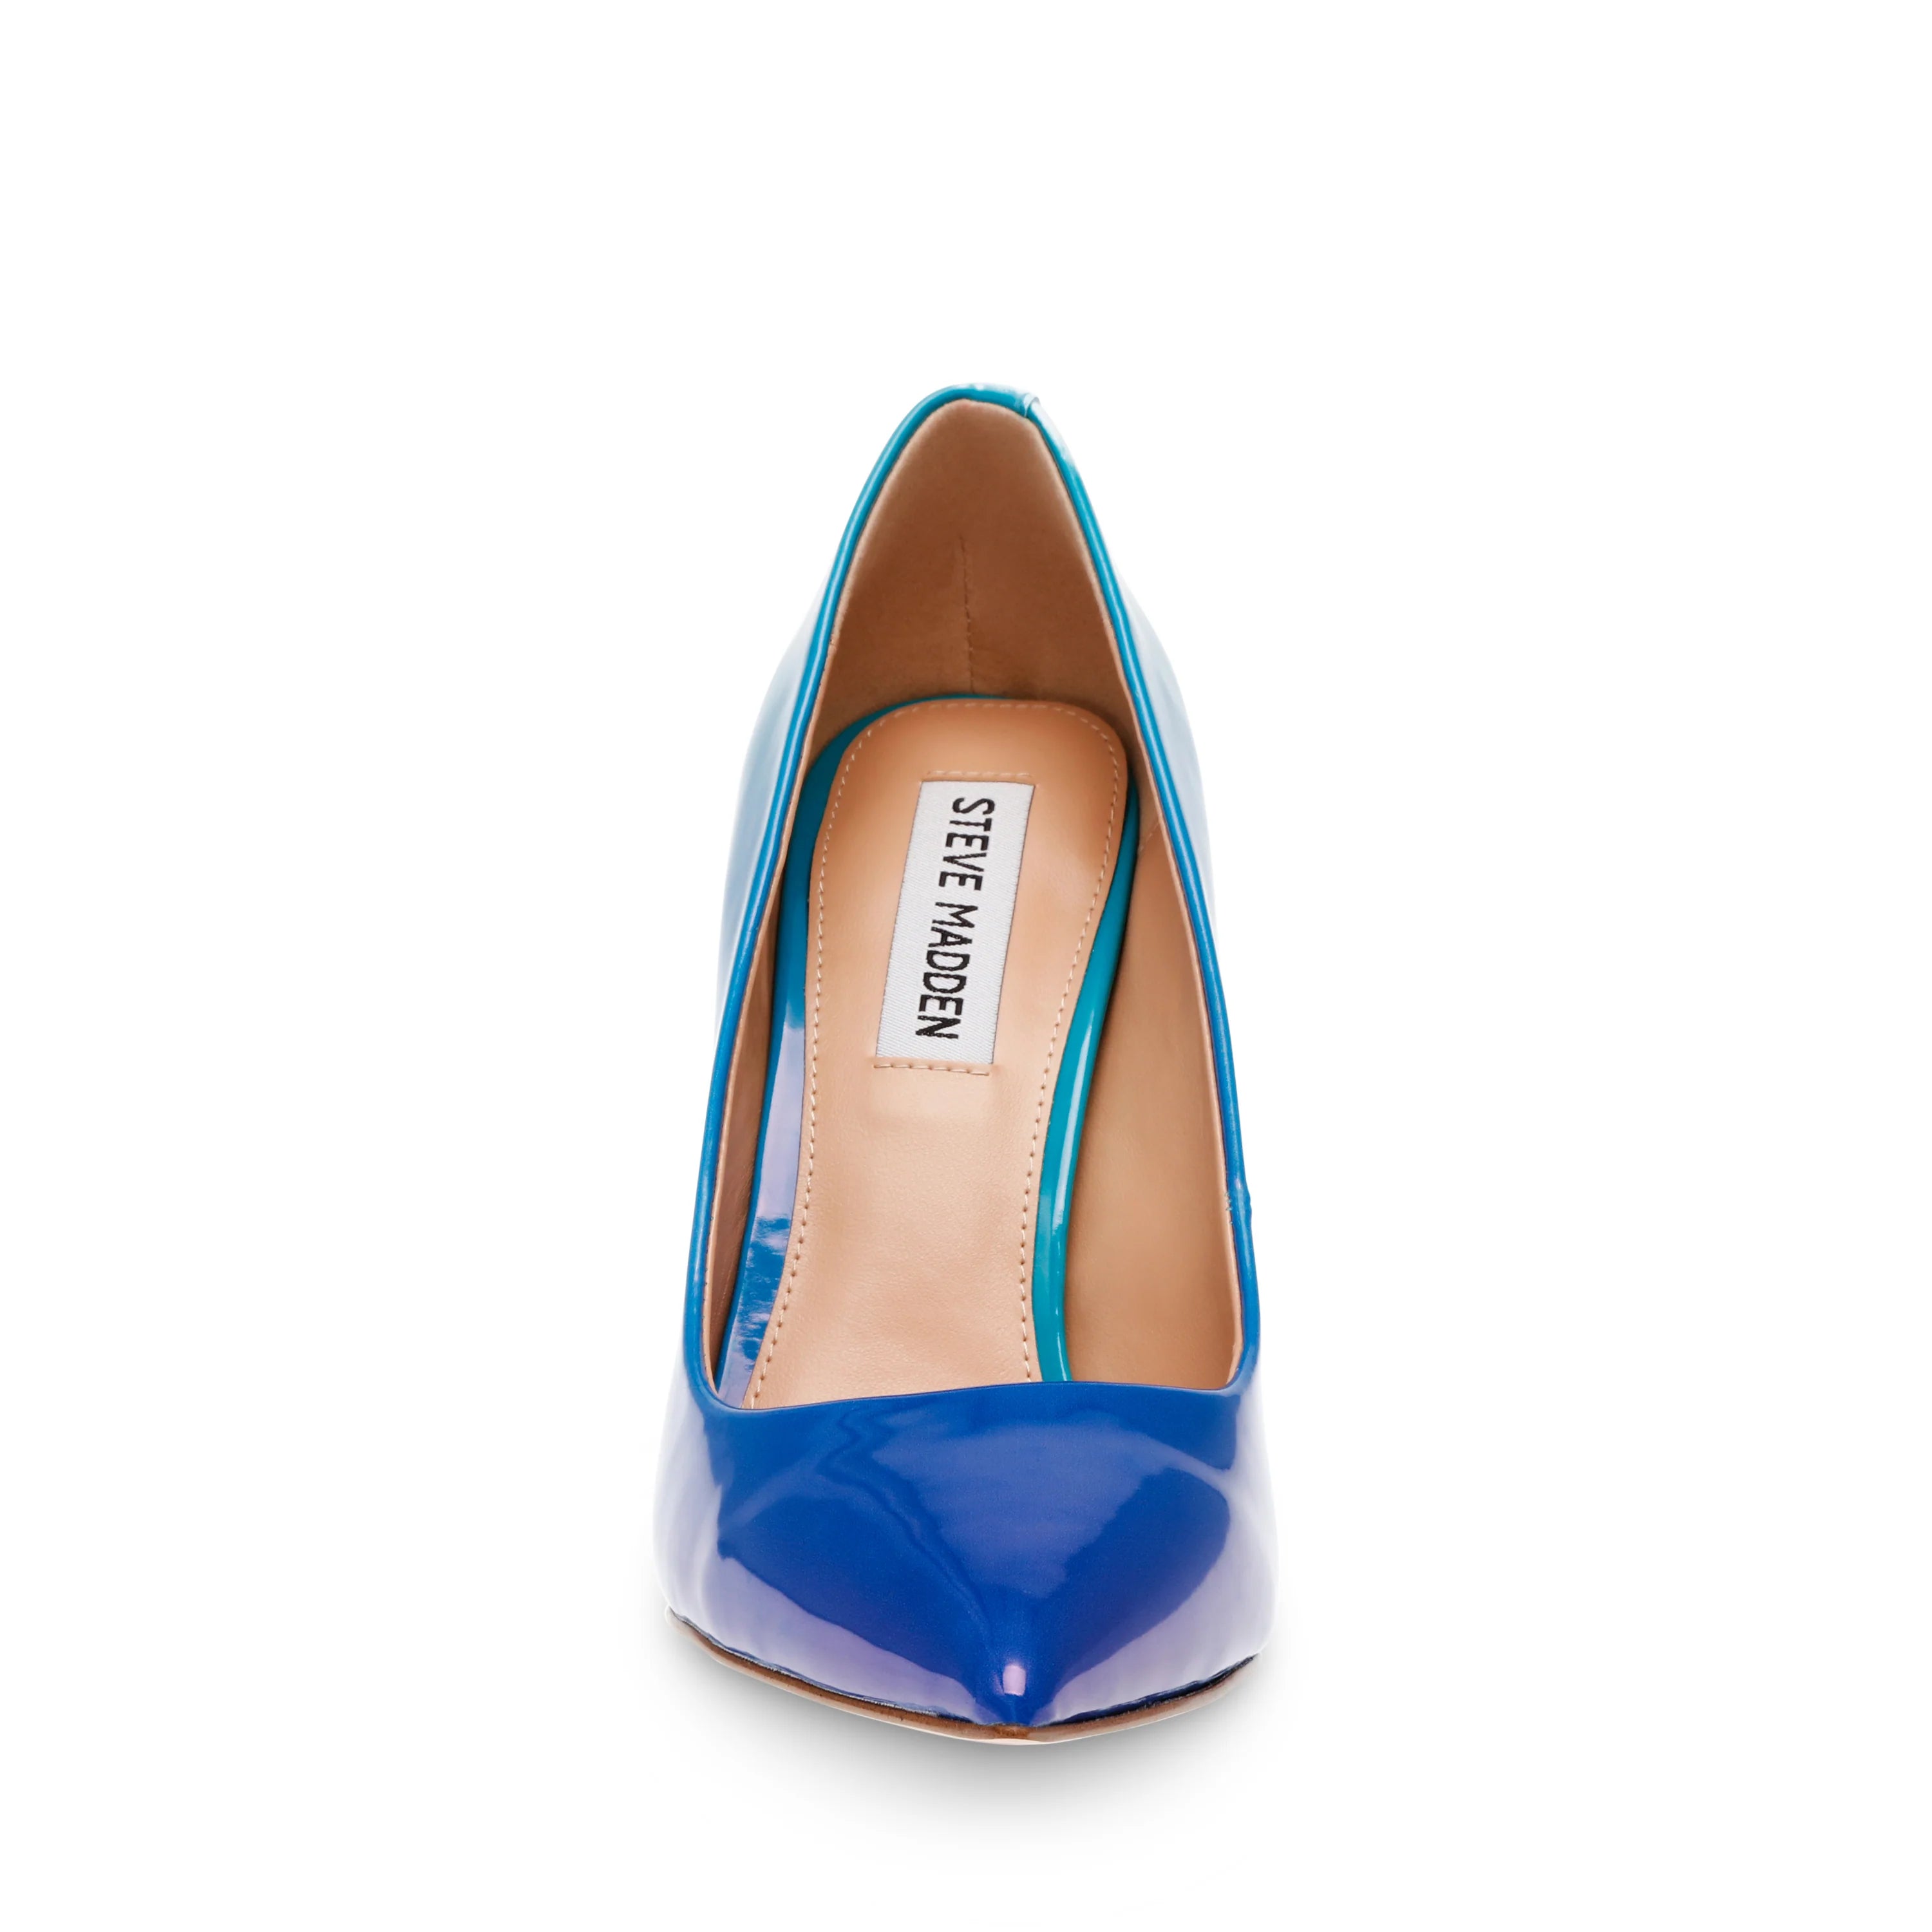 STEVE MADDEN OMBRE POINTED TOE PUMP IN BLUE